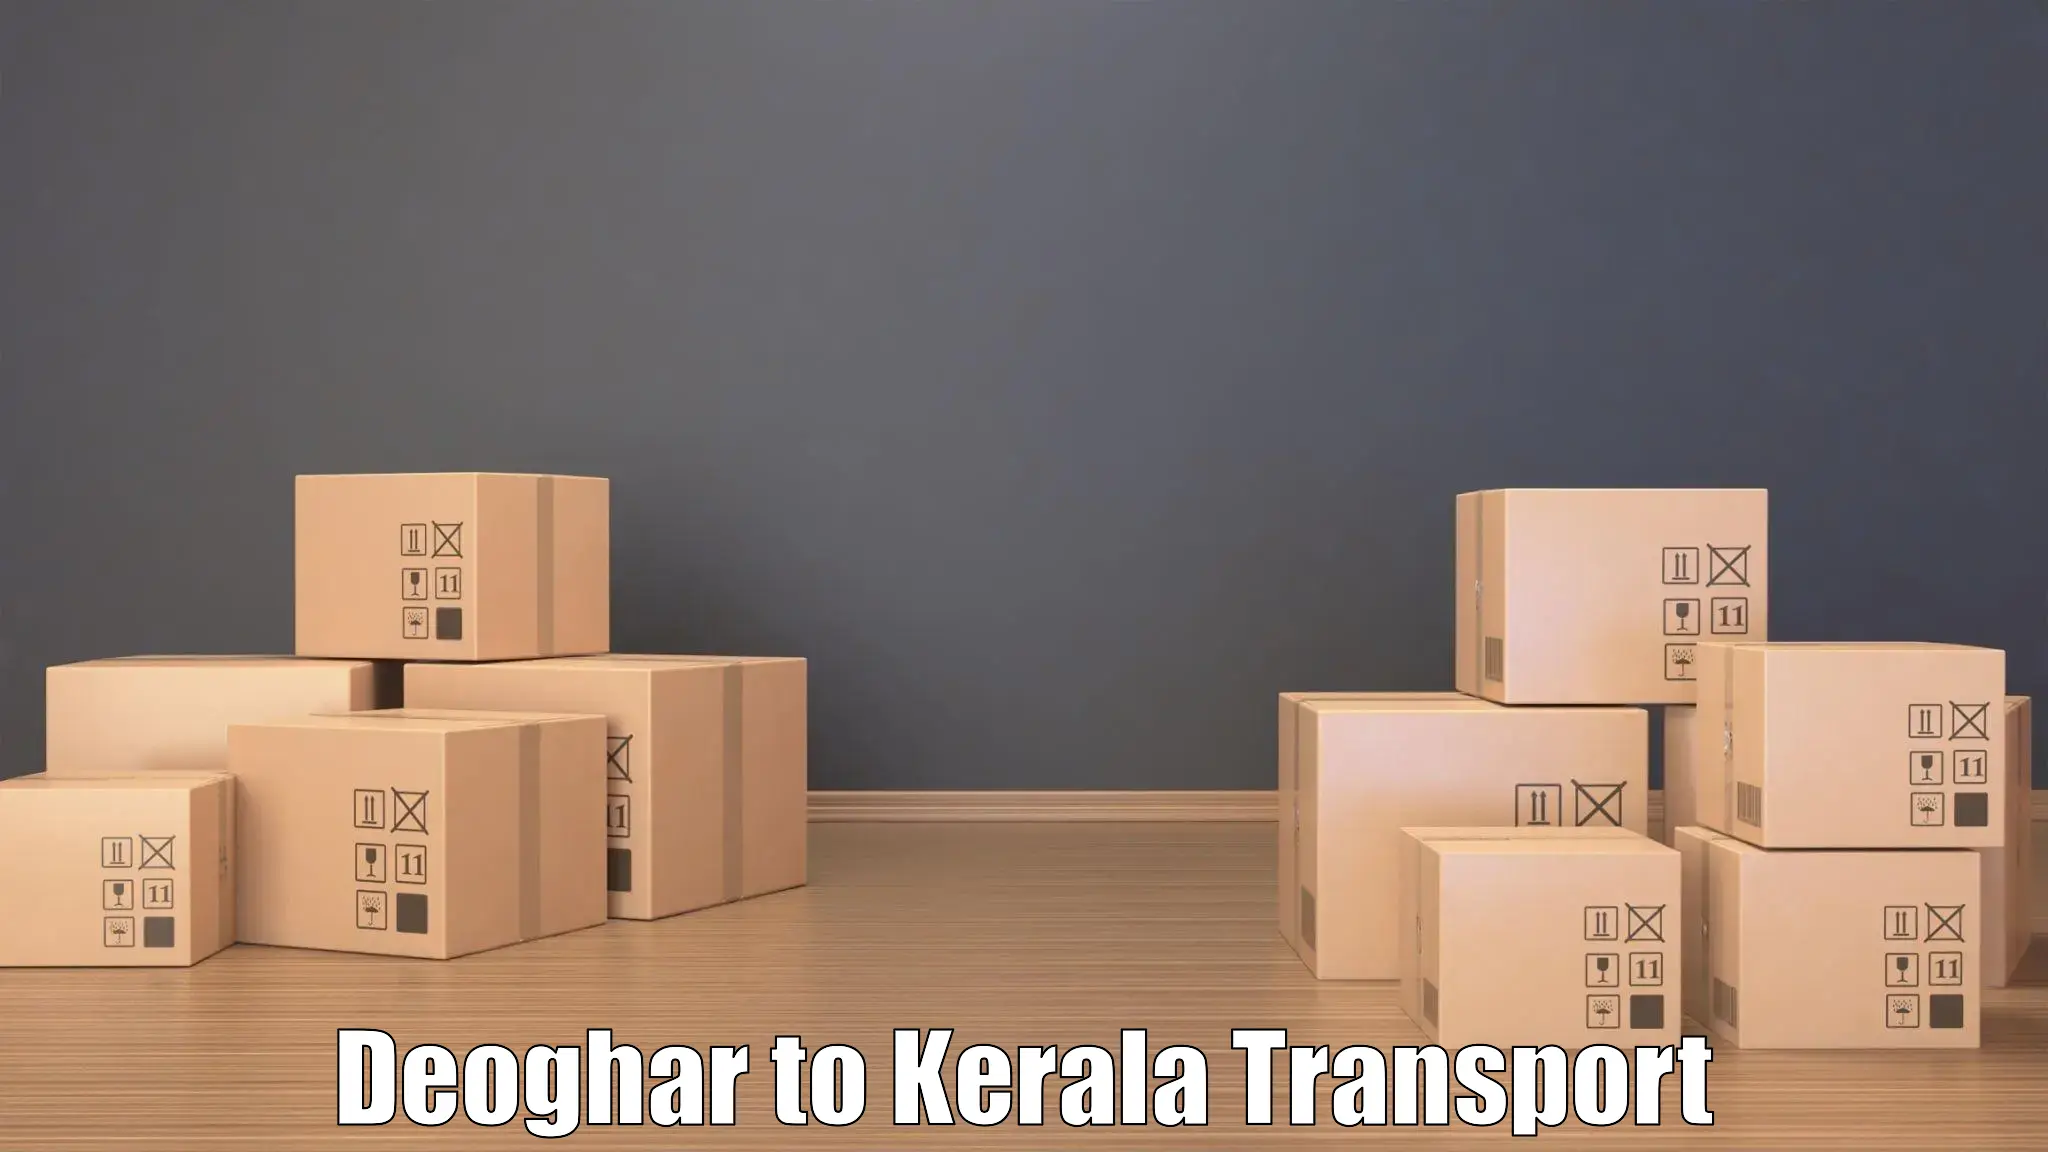 Nearby transport service Deoghar to Chingavanam